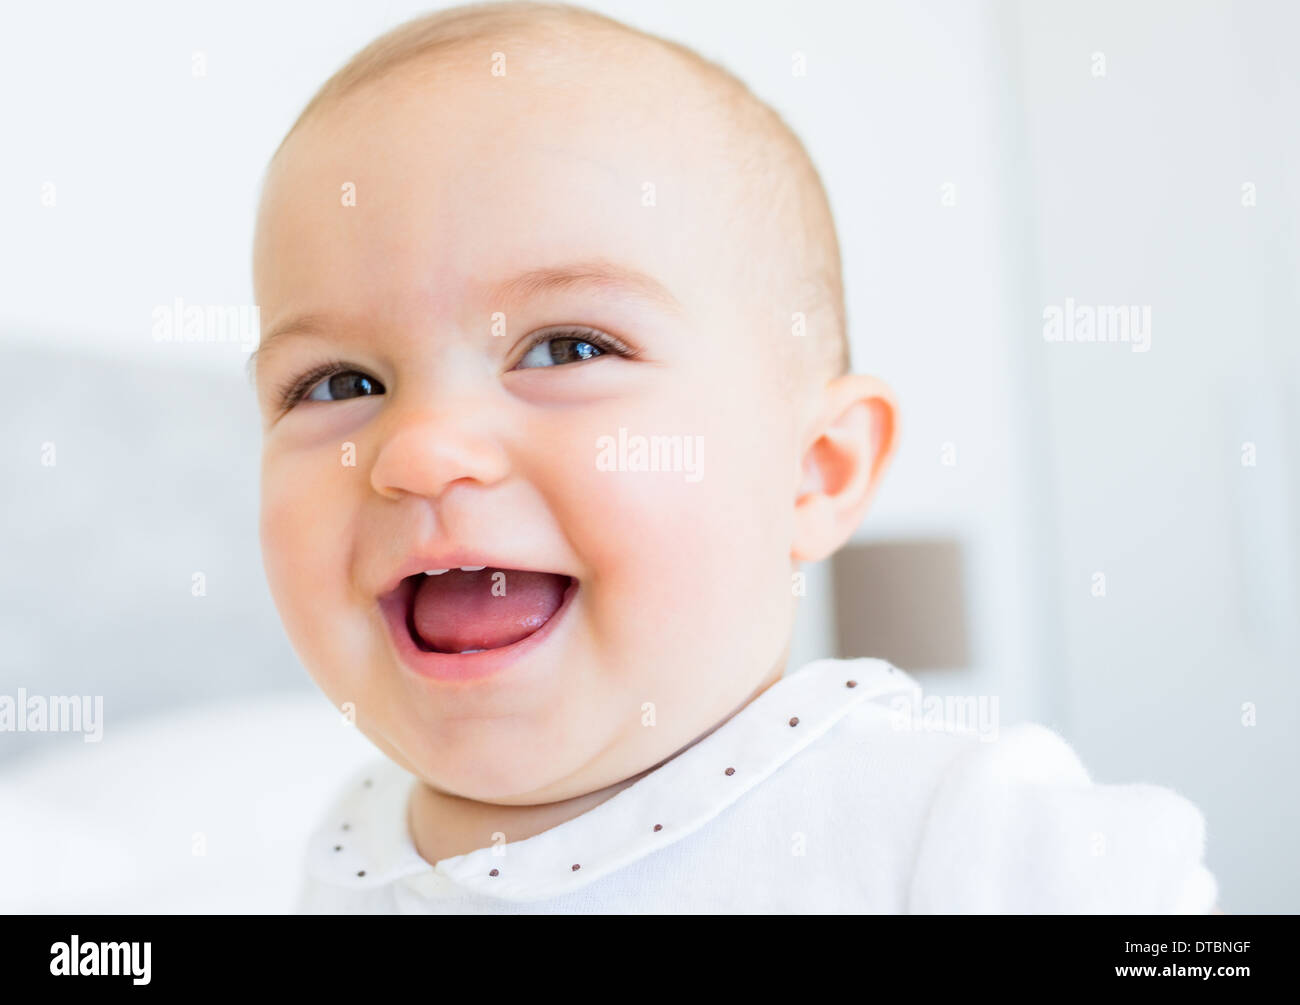 Closeup portrait of a smiling cute baby Stock Photo